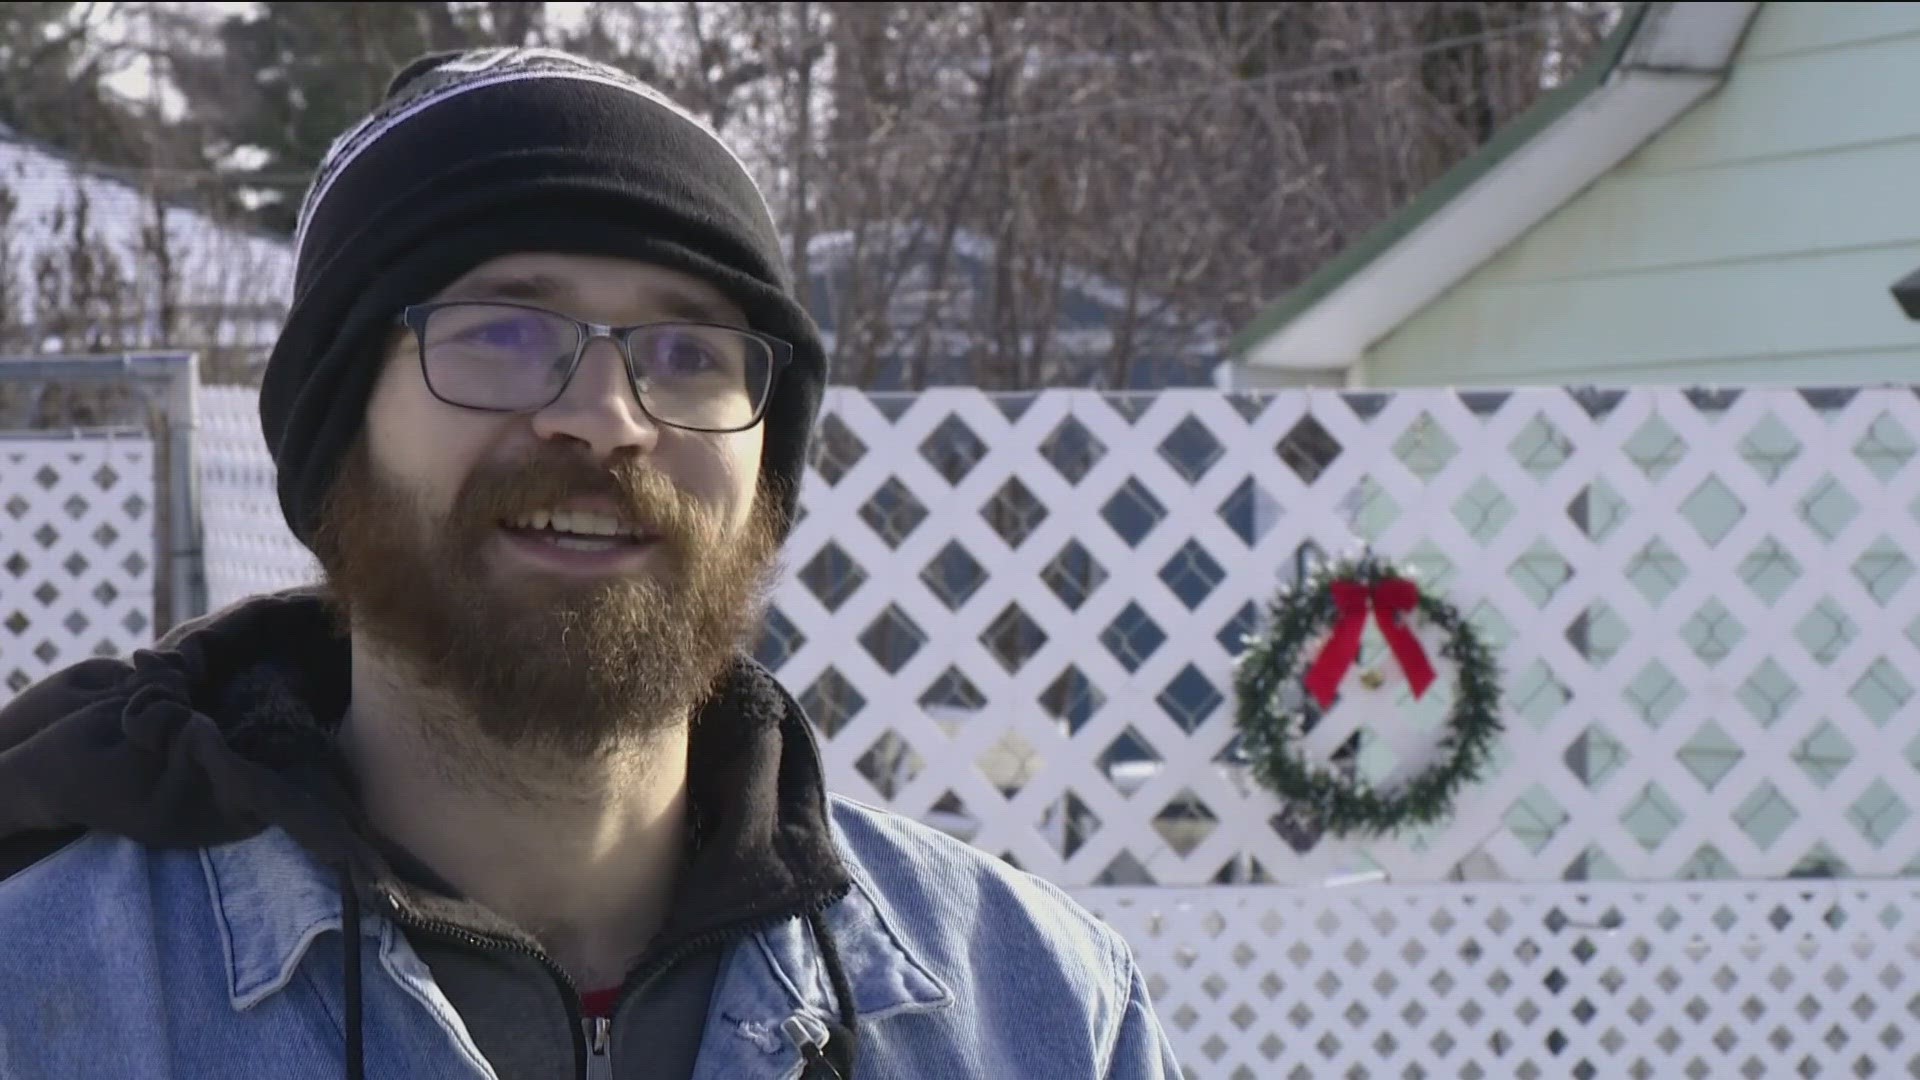 Tanner Sypert won't accept money or tips, but he will accept hot cocoa. He says he just wants to help shovel snow for his neighbors who need it the most.